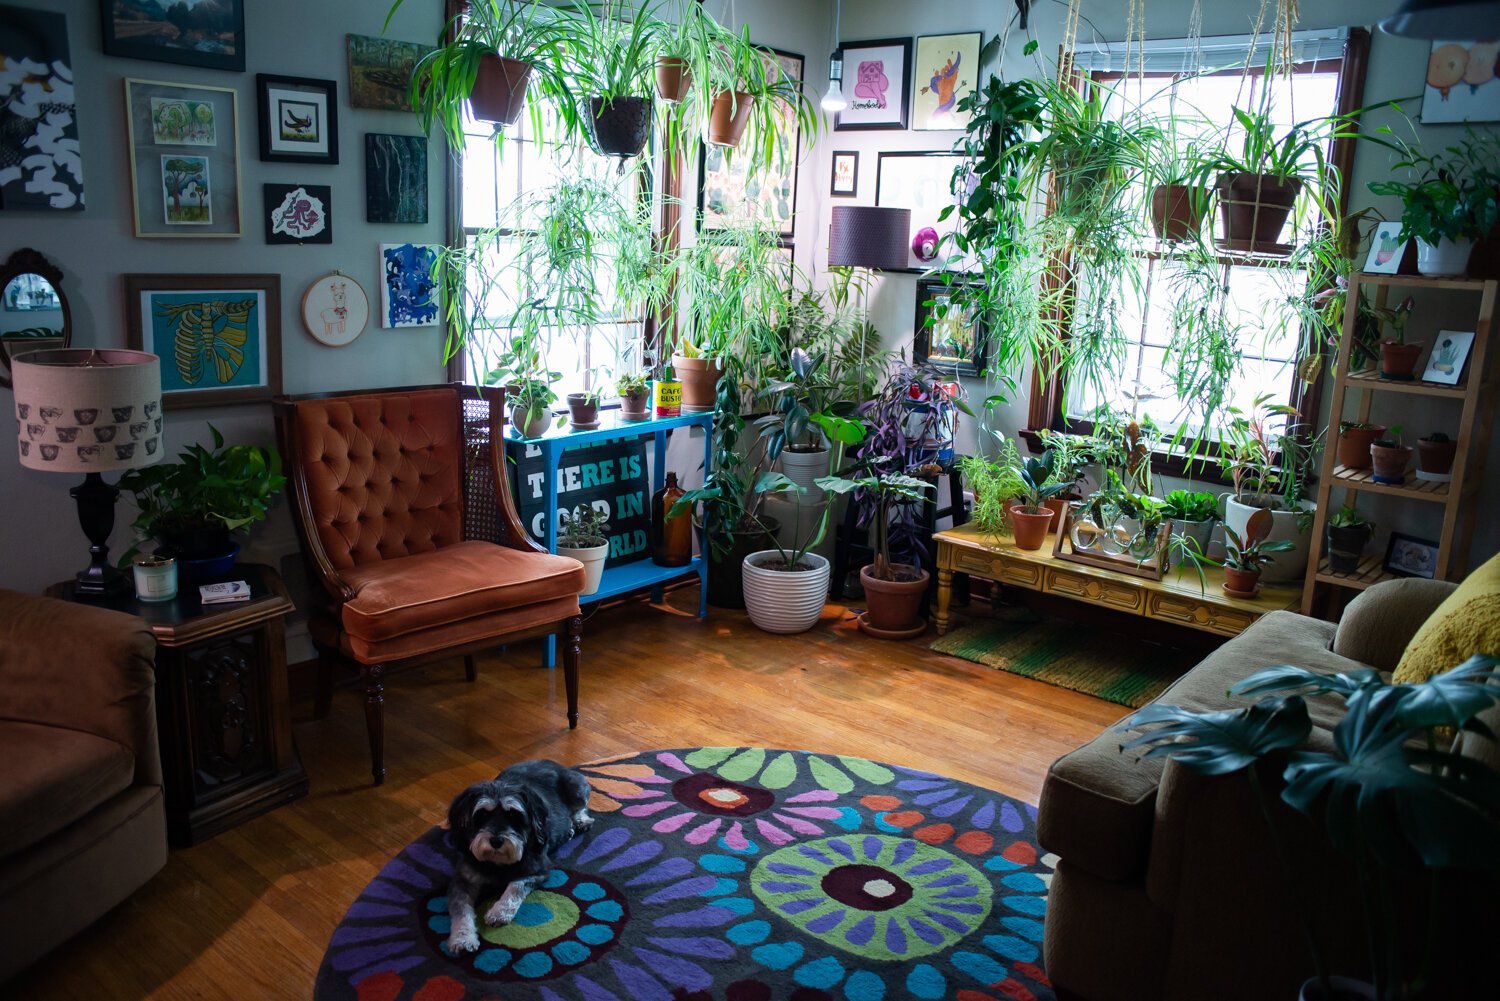 A variety of plants fill the living room as their dog Jake sits on the rug.